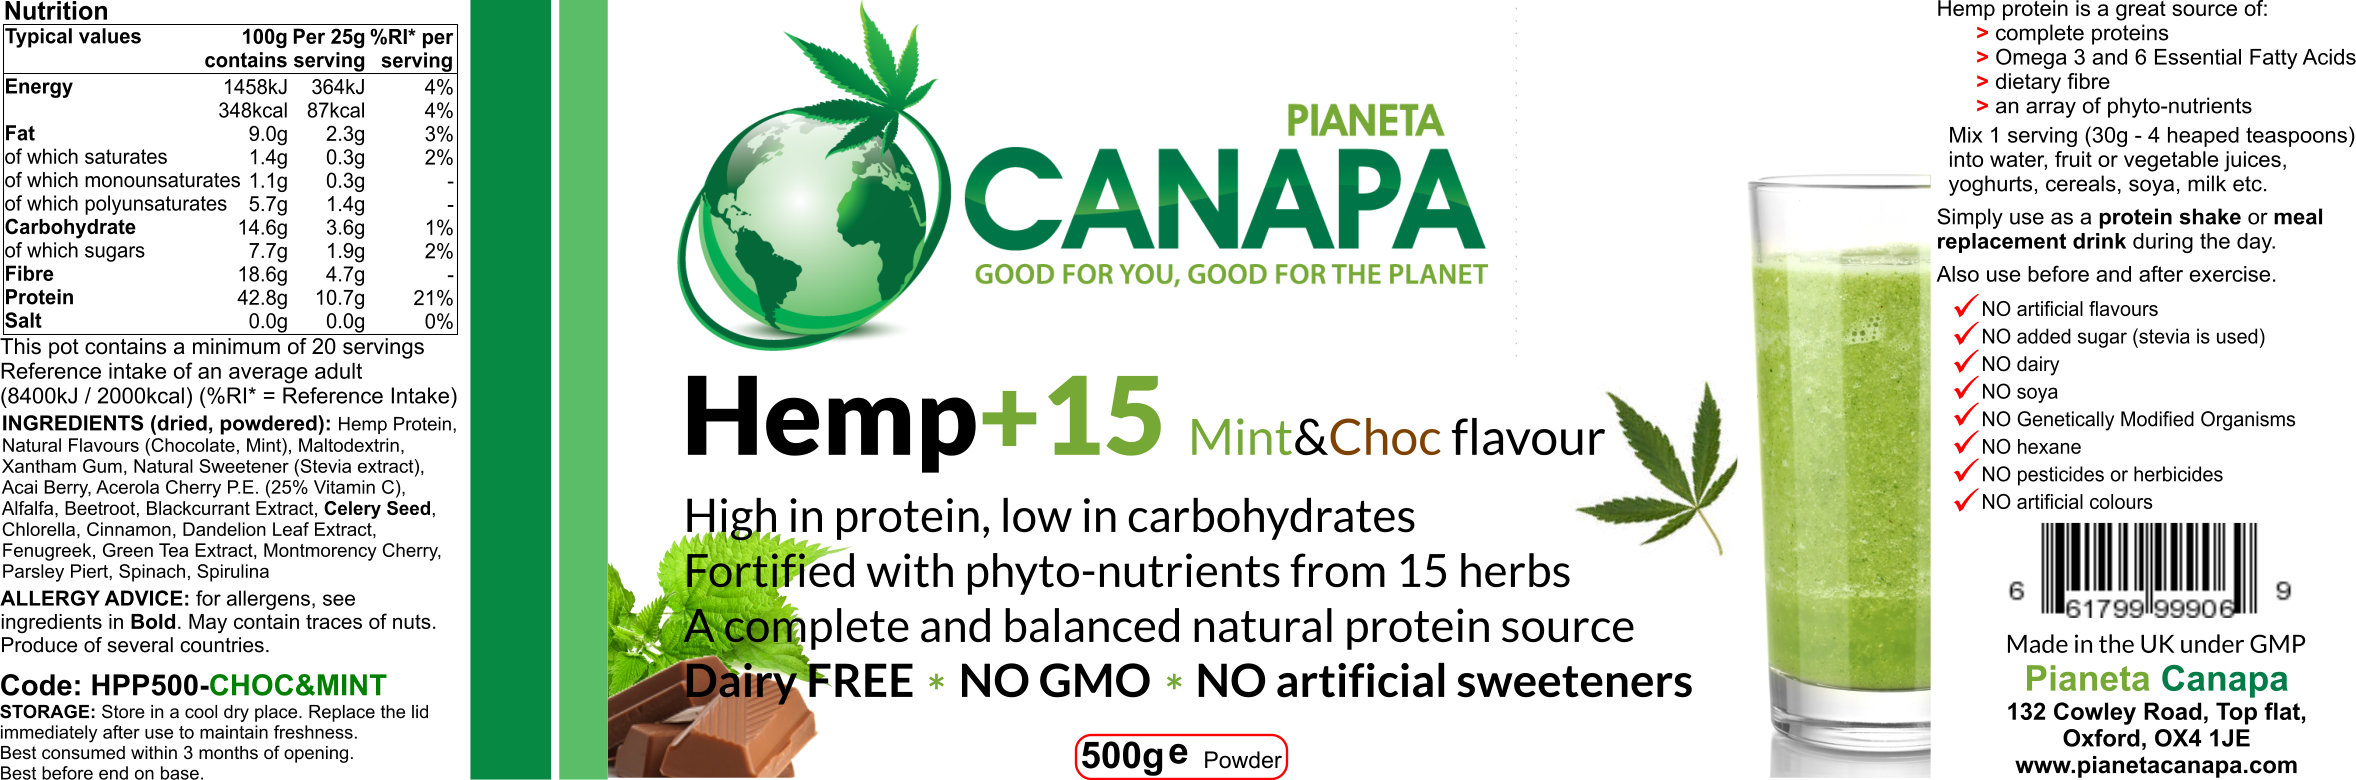 Hemp+15 Protein Powder with 15 herbs, Mint&Chocolate flavour. 100% natural, vegetable ingredients. 42.8% proteins, 18.6% fibres, 7.7% carbohydrates (sugar). Vegan. A lot of healthy energy!